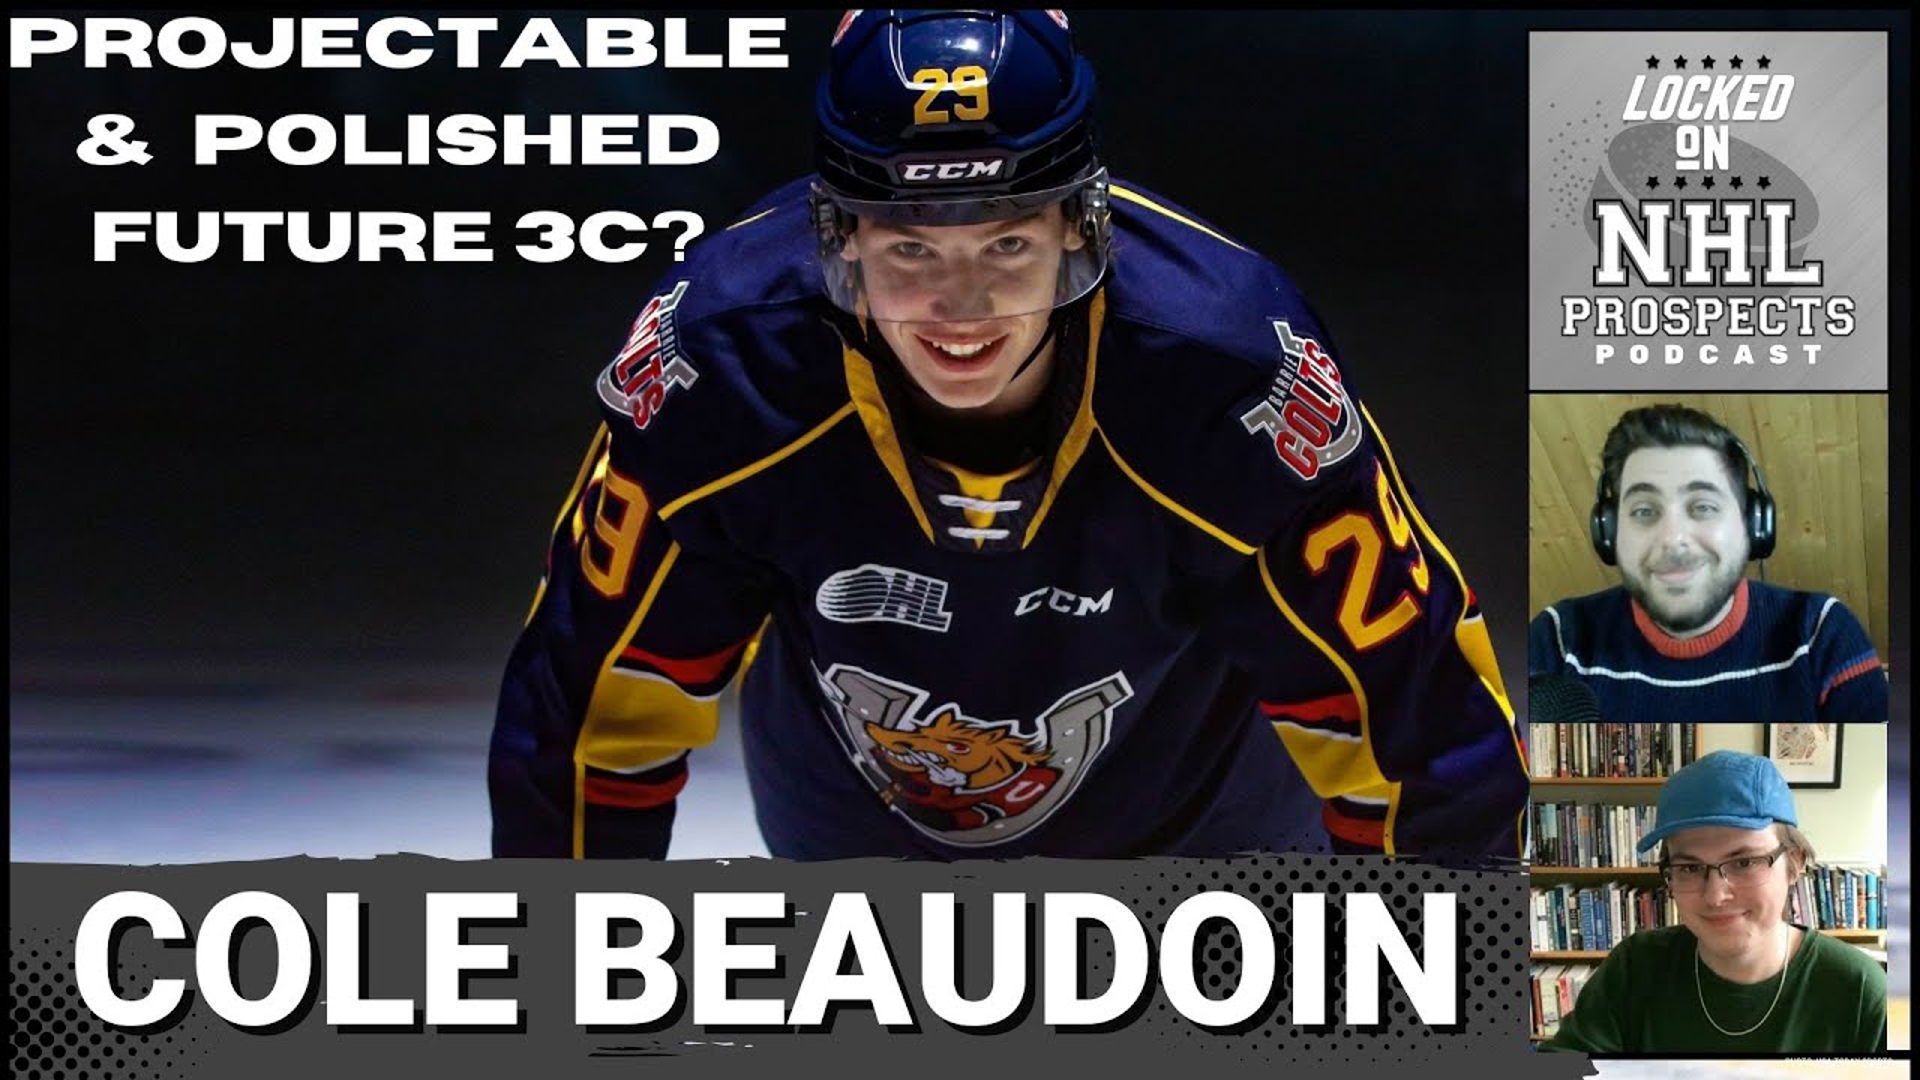 COLE BEAUDOIN Scouting Report | Projectable & High-Likelihood 3rd Line Center?